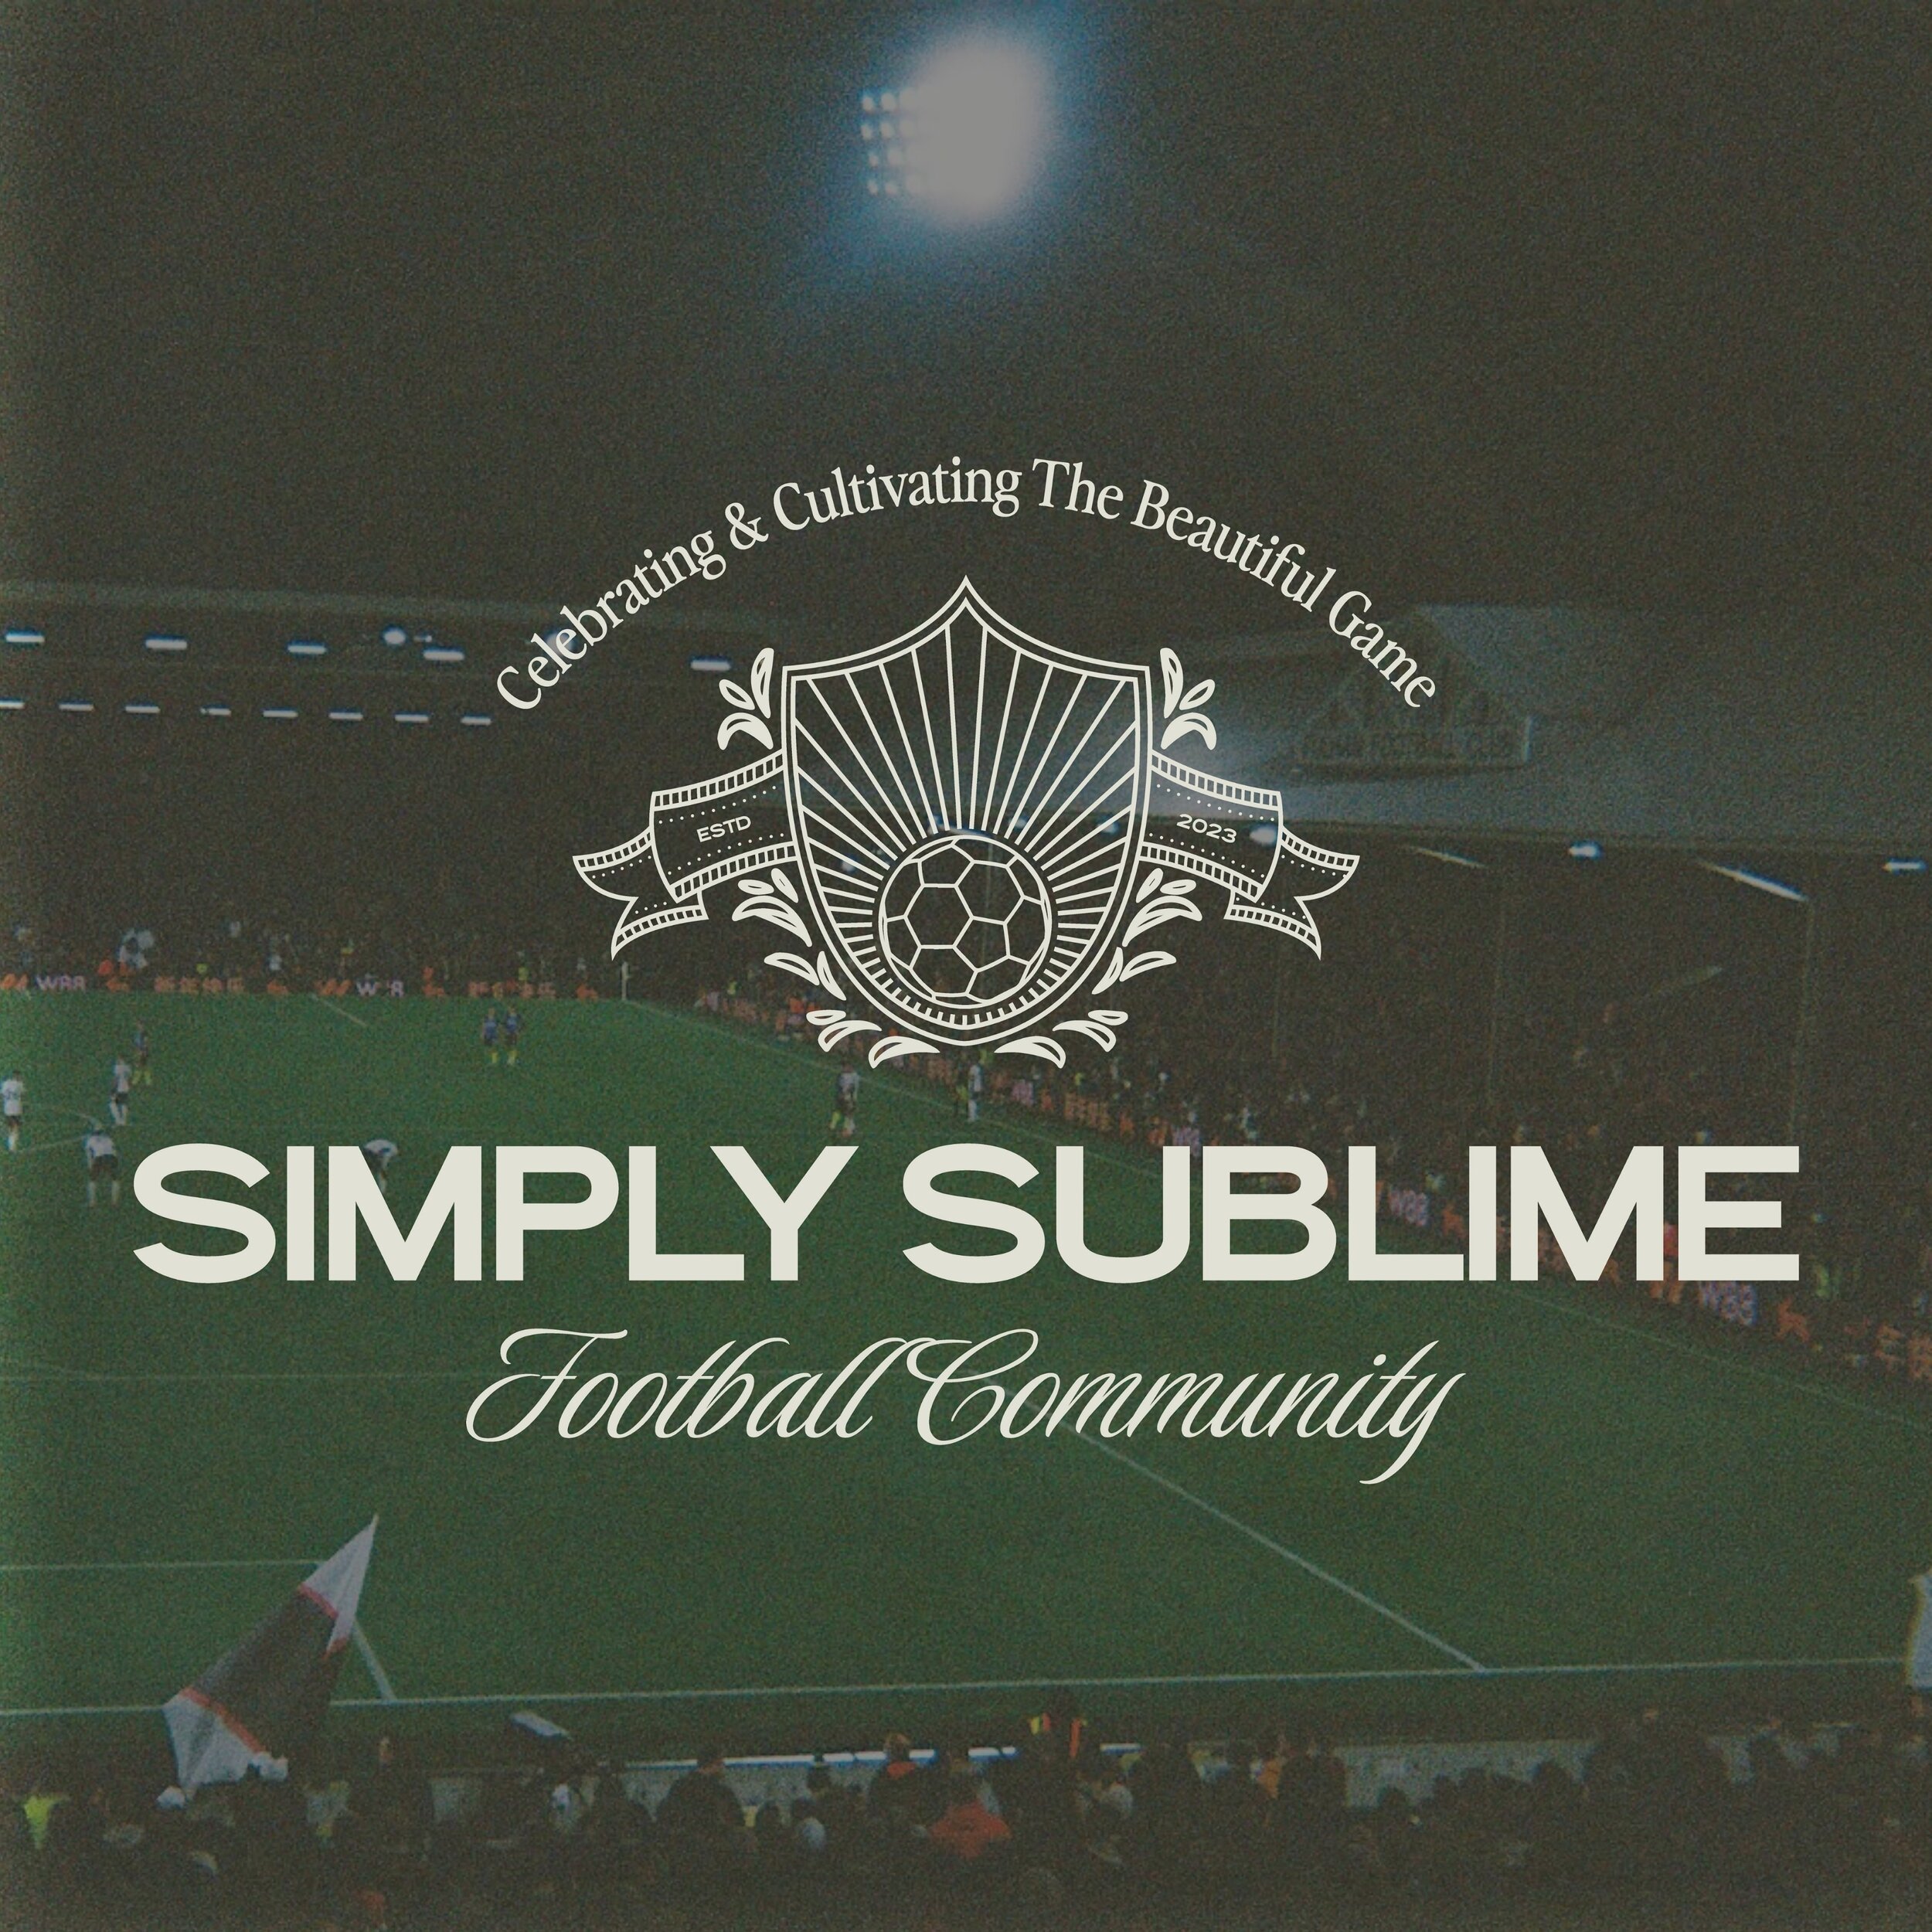 Simply Sublime FC